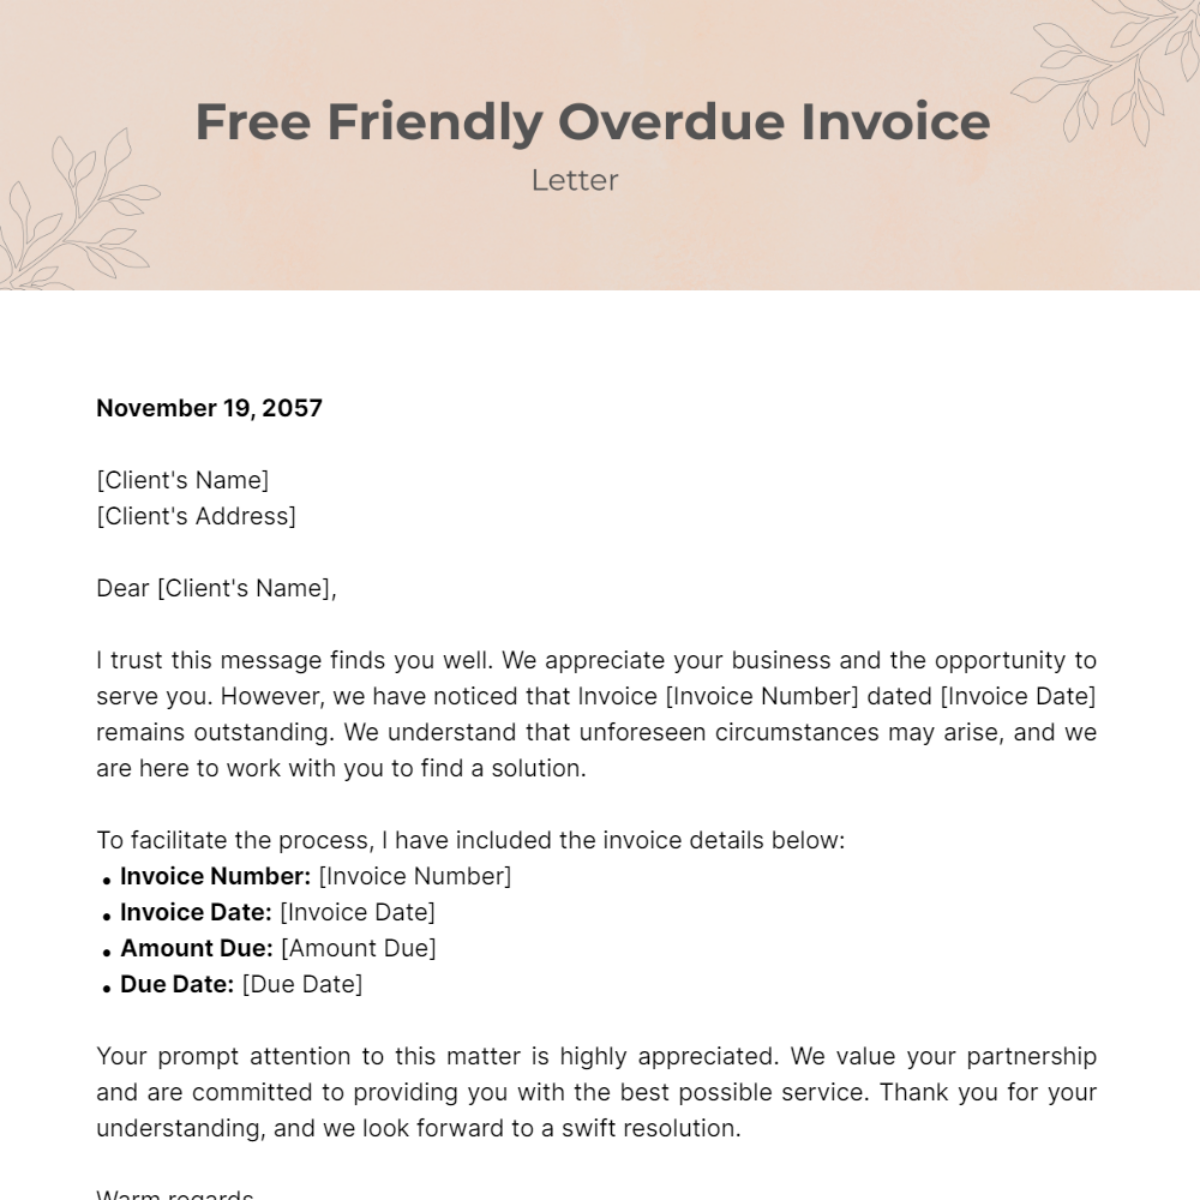 Friendly Overdue Invoice Letter Template